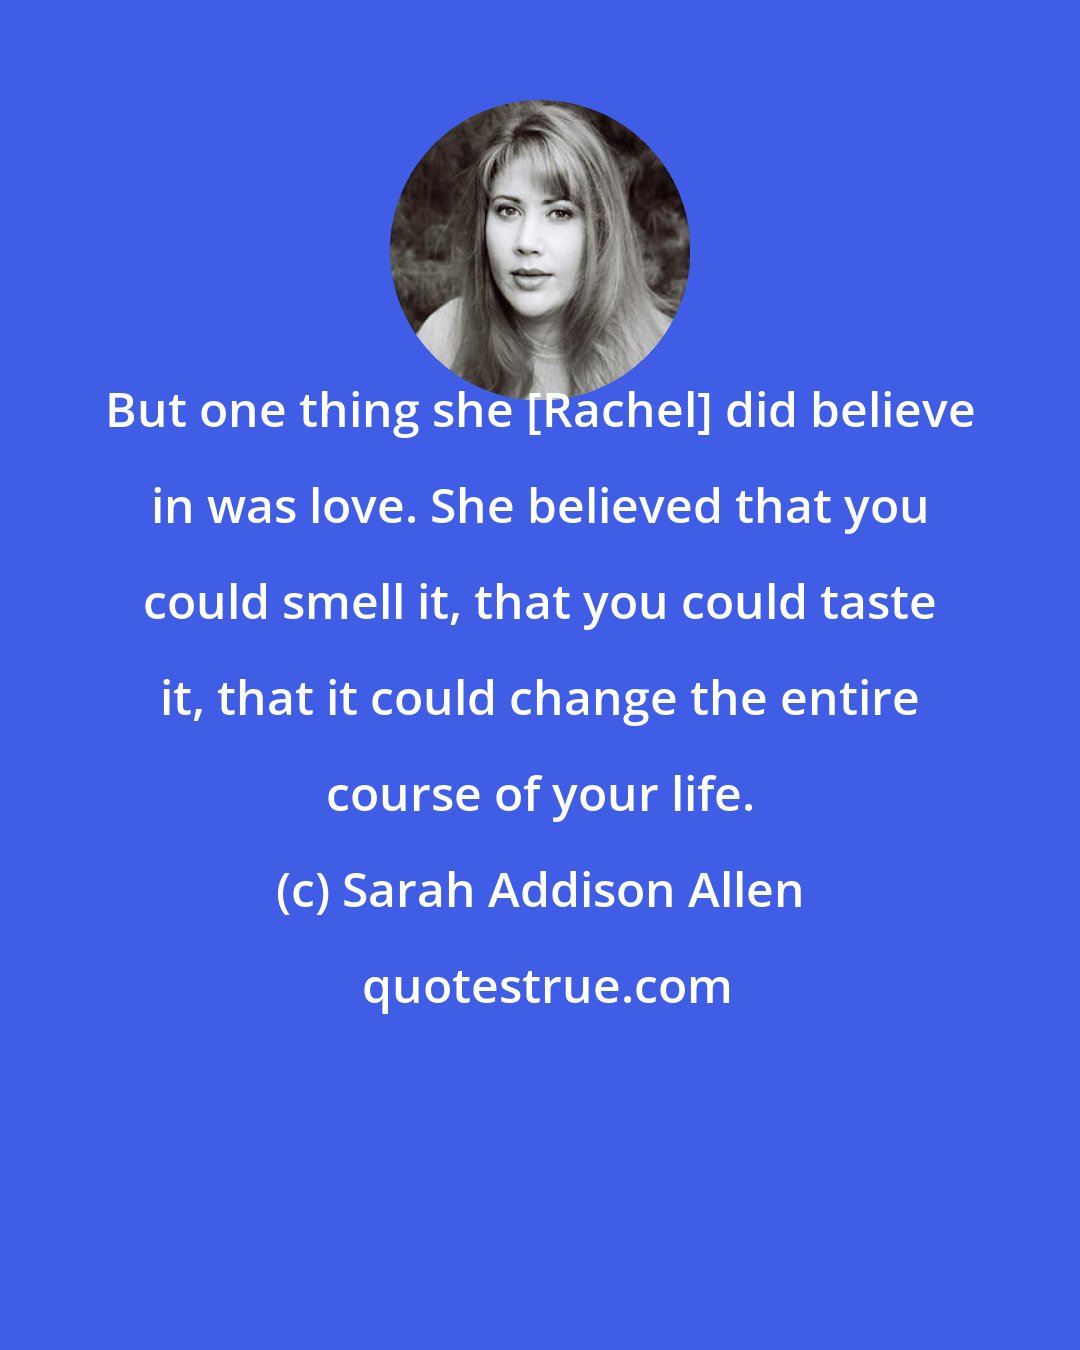 Sarah Addison Allen: But one thing she [Rachel] did believe in was love. She believed that you could smell it, that you could taste it, that it could change the entire course of your life.